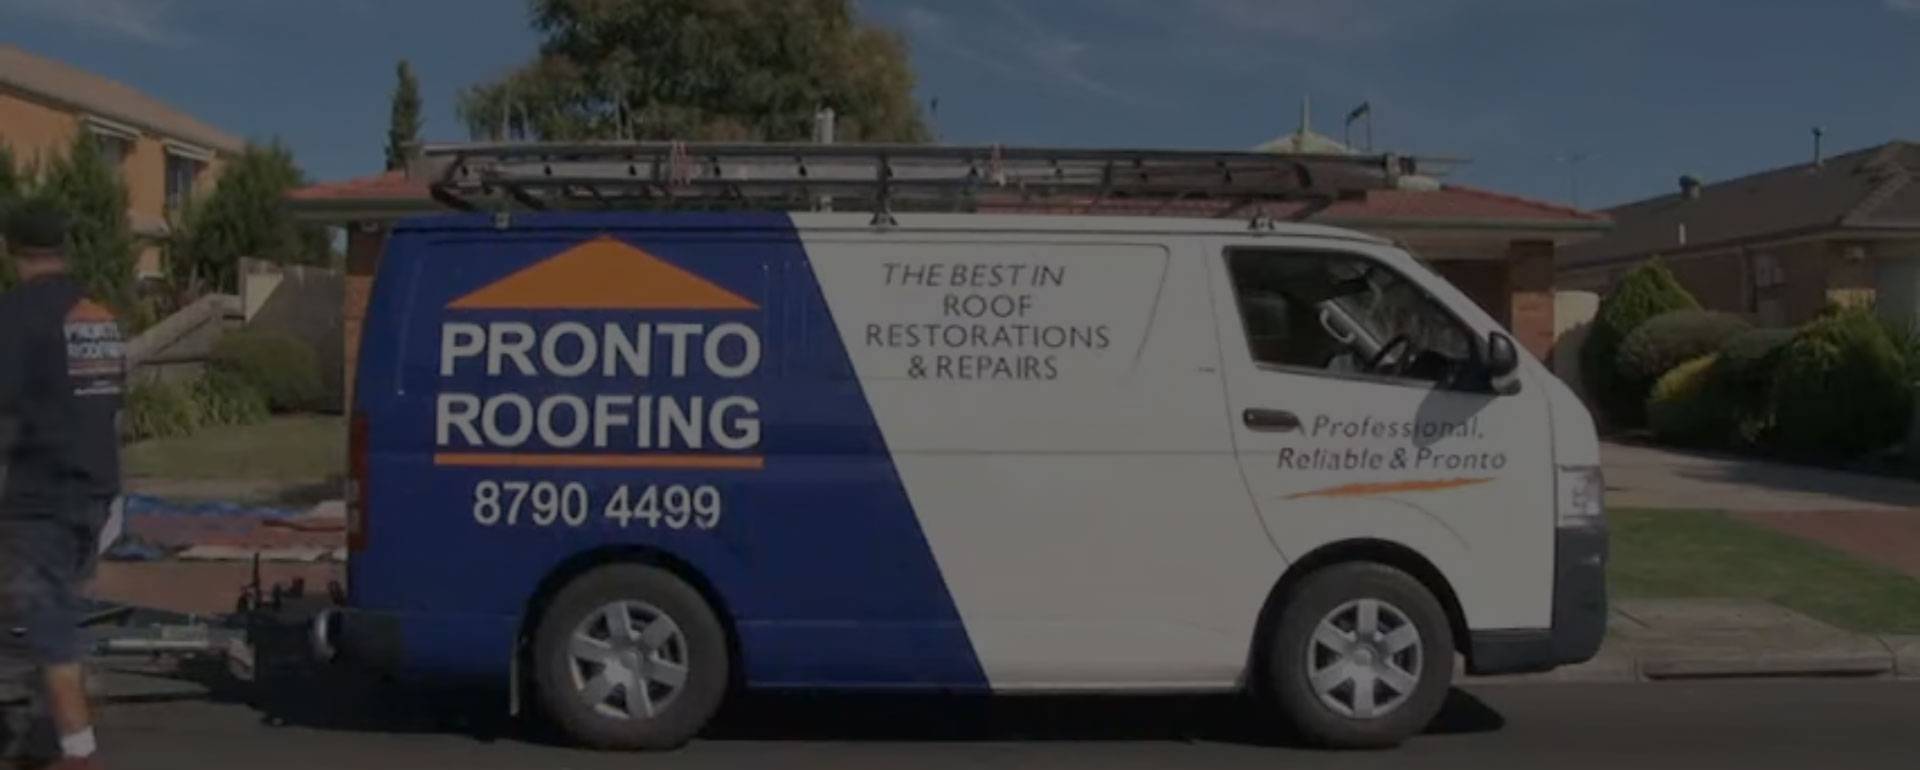 Contact us for Pronto Roofing anywhere in Melbourne